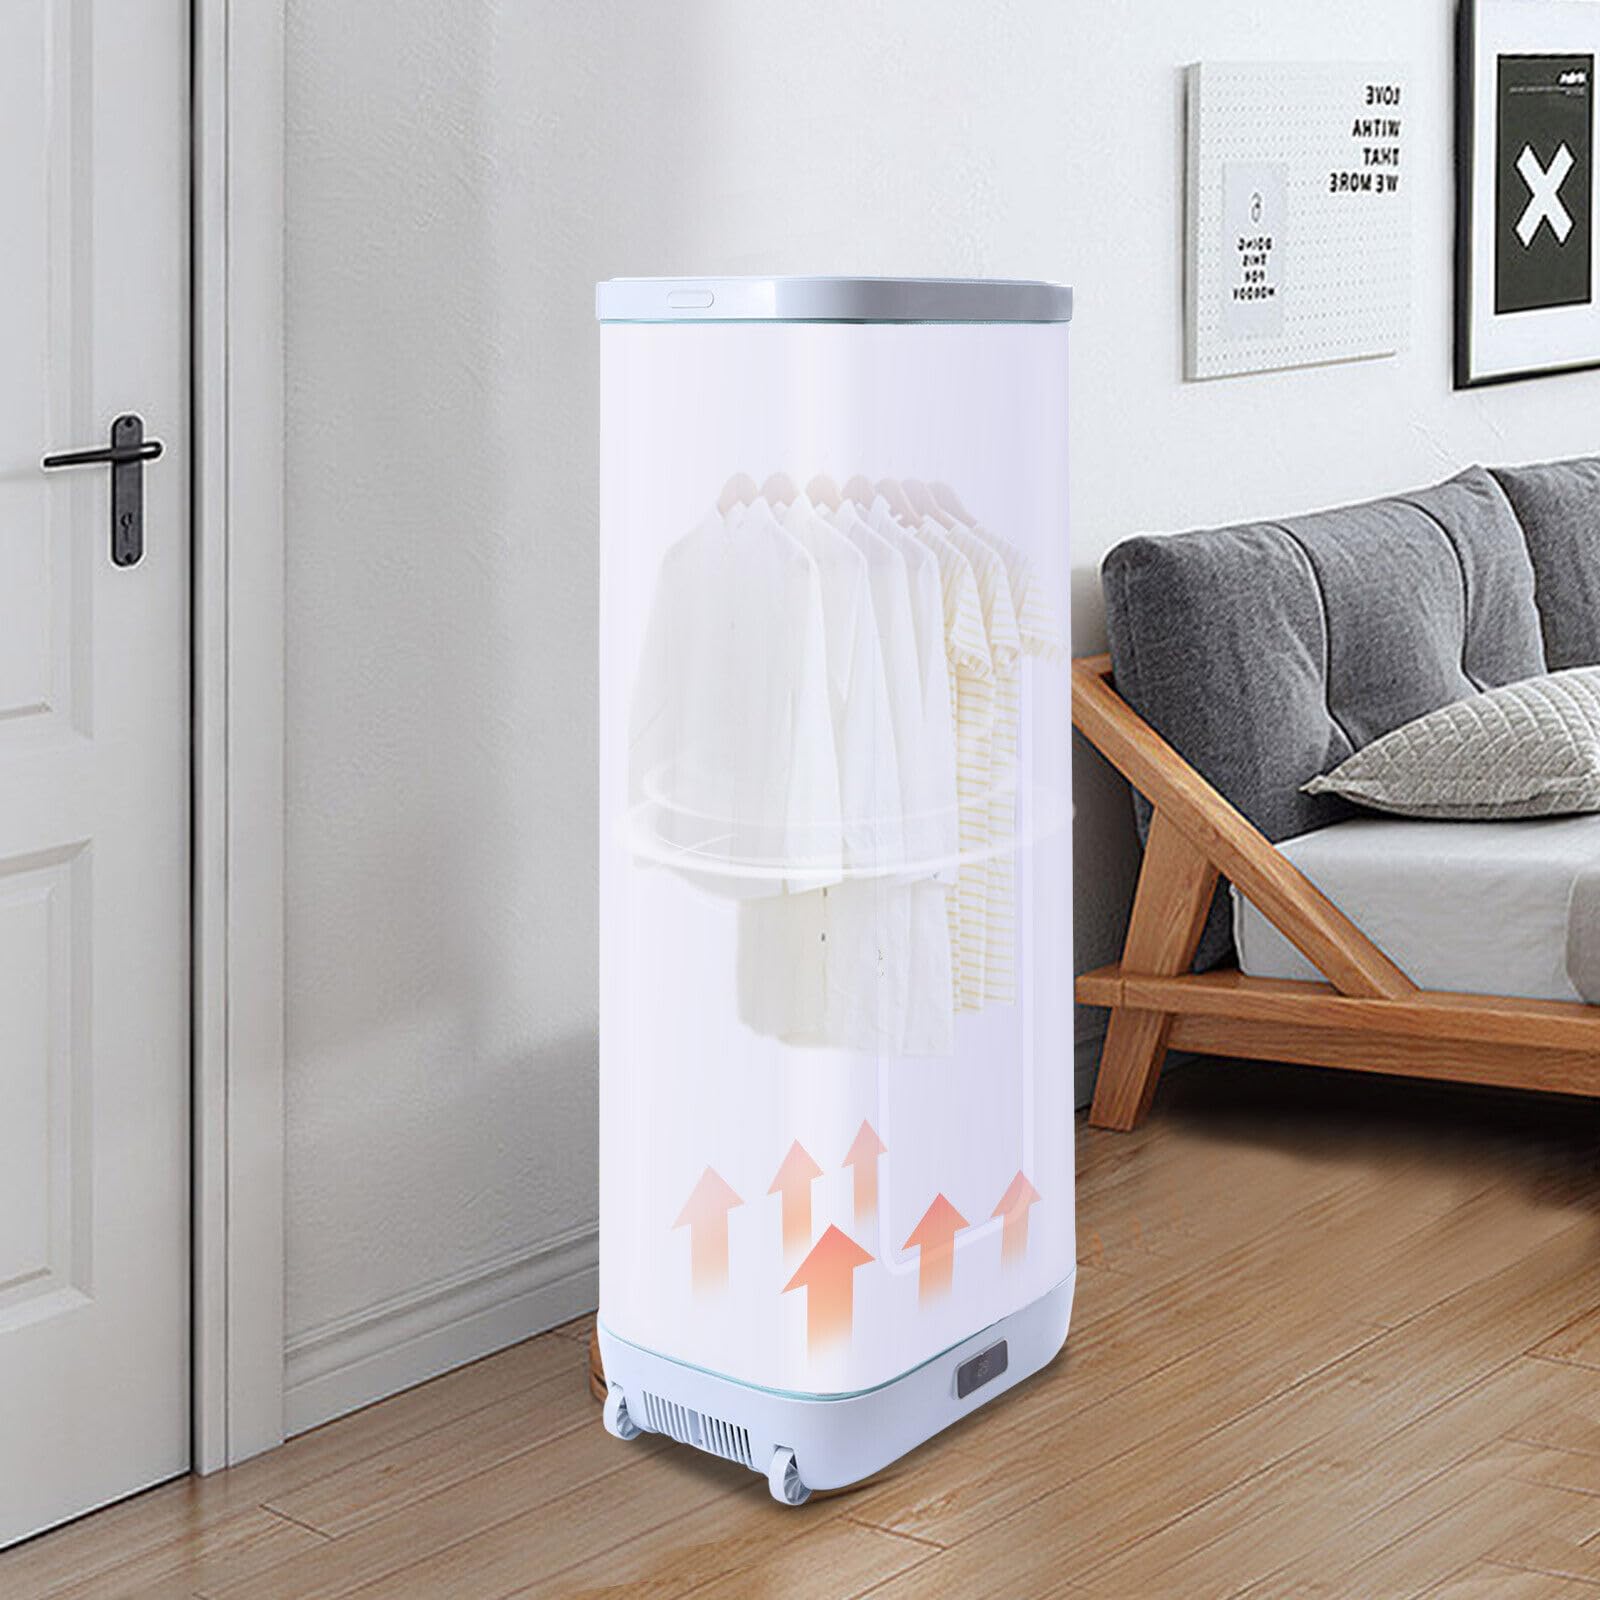 PIAOCAIYIN Portable Clothes Dryer, Mini Electric Quick Drying Dryer, Household Dryer Machine, 68℃/ 154.4℉ Drying Temperature, Adjustable Time & Foldable, Portable Dryer for Apartment Dorm Rv, White